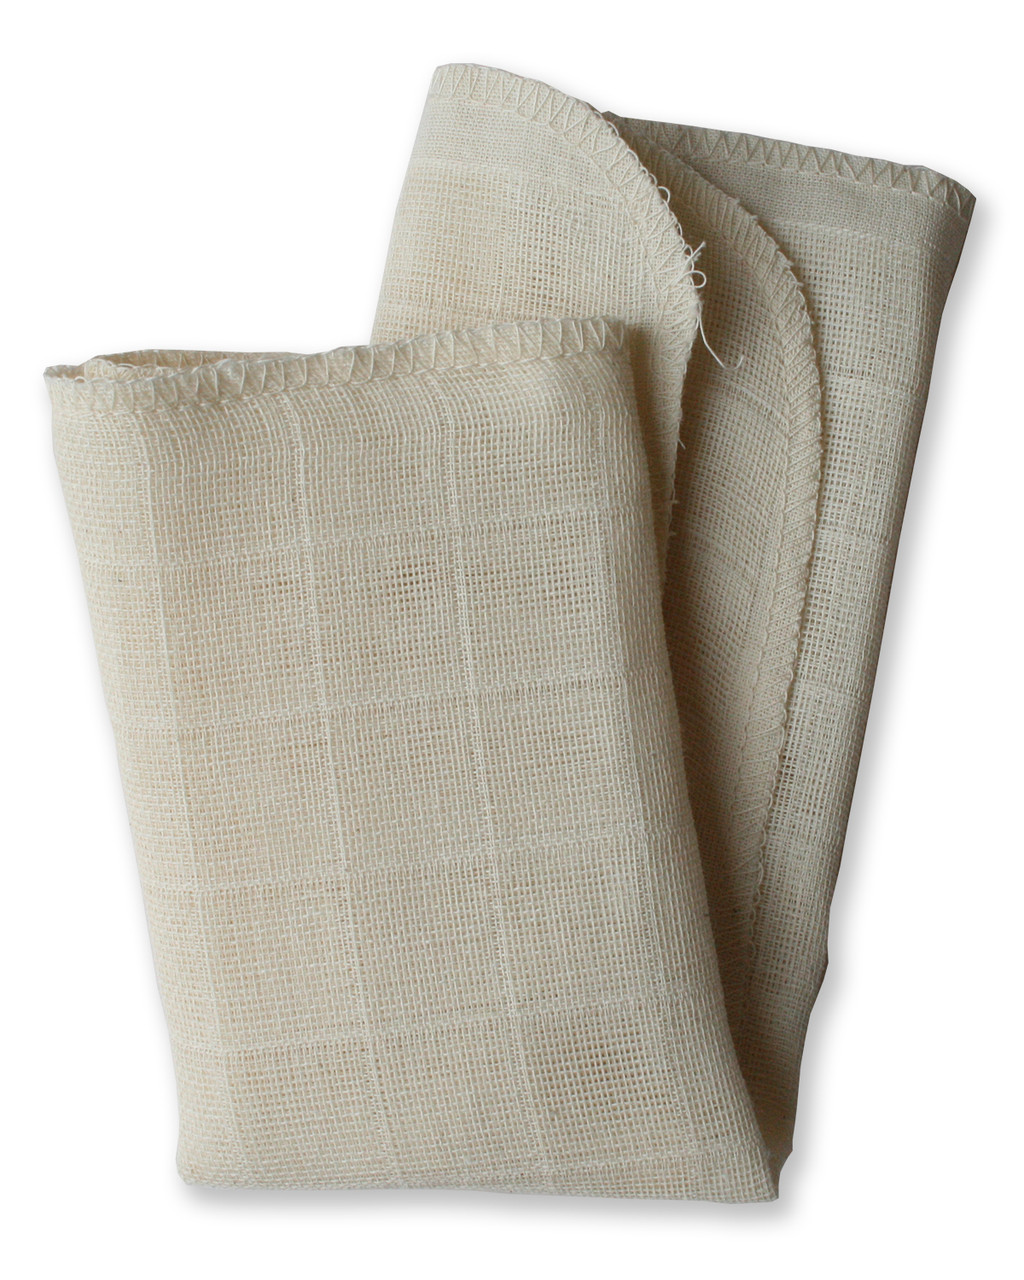 Large Organic Cotton Exfoliating Muslin Face Cloths (3-Pack